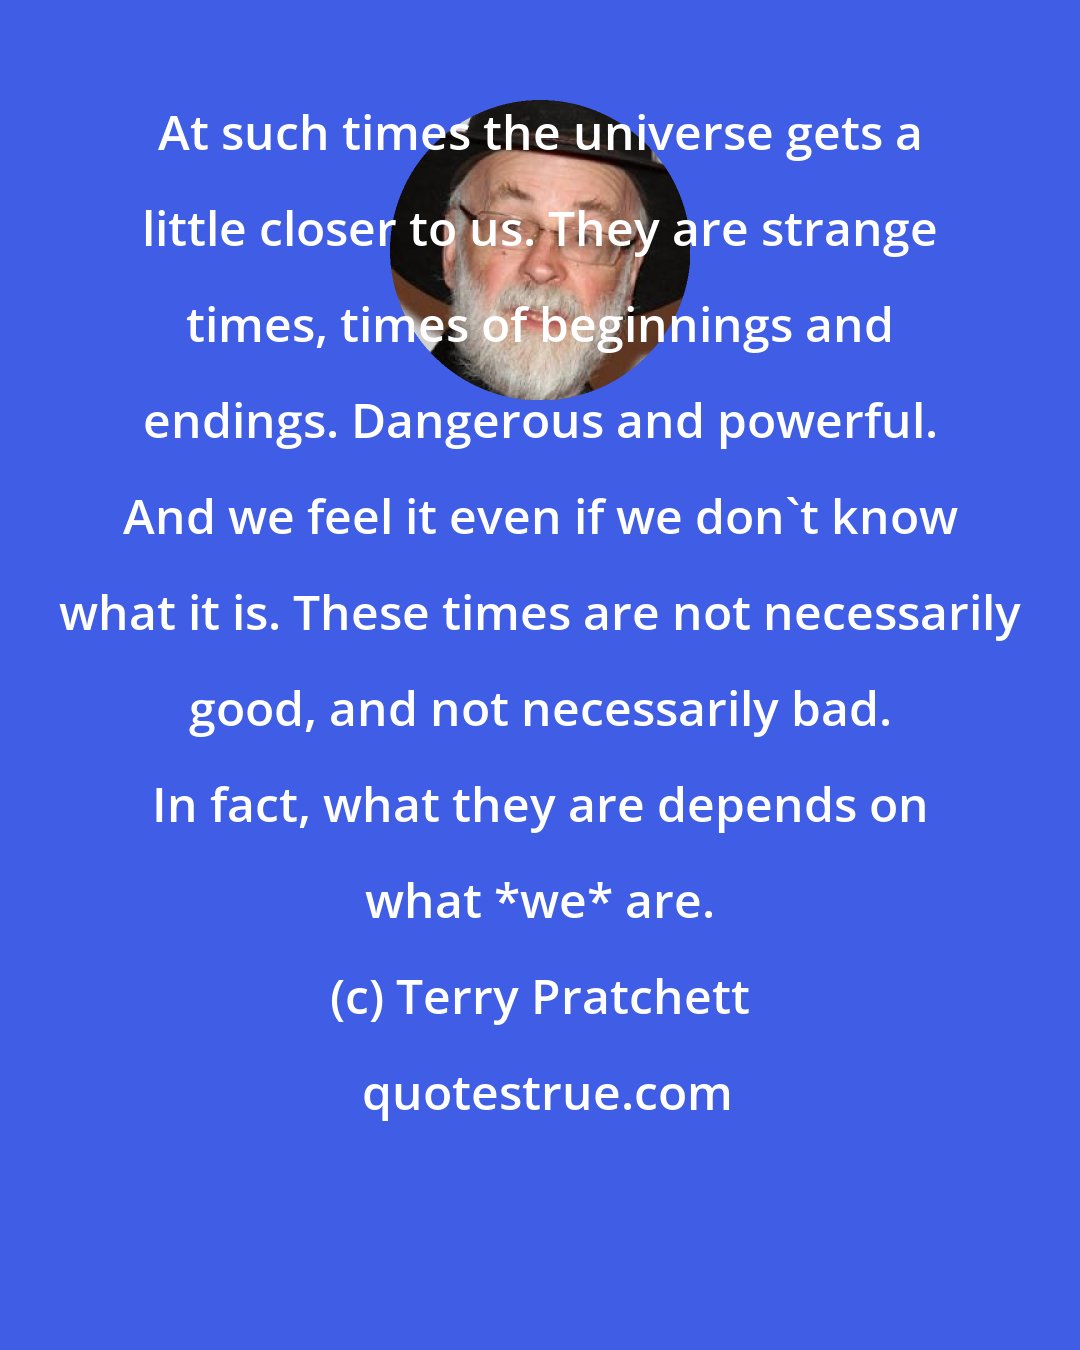 Terry Pratchett: At such times the universe gets a little closer to us. They are strange times, times of beginnings and endings. Dangerous and powerful. And we feel it even if we don't know what it is. These times are not necessarily good, and not necessarily bad. In fact, what they are depends on what *we* are.